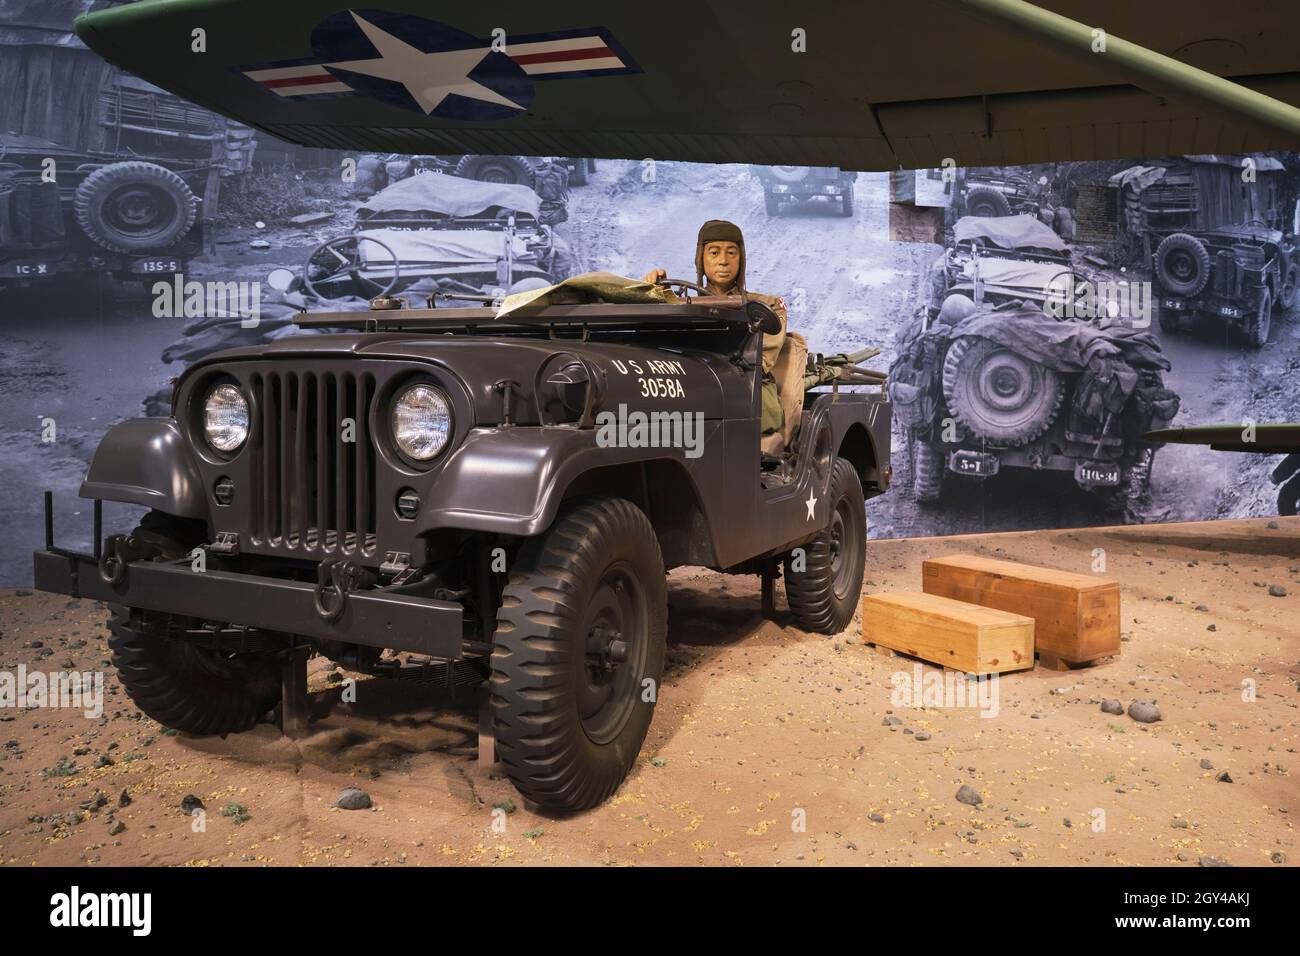 A G-758 Willys Jeep during the Korean war. At the US Army Transportation Museum at Fort Eustis, Virginia. Stock Photo